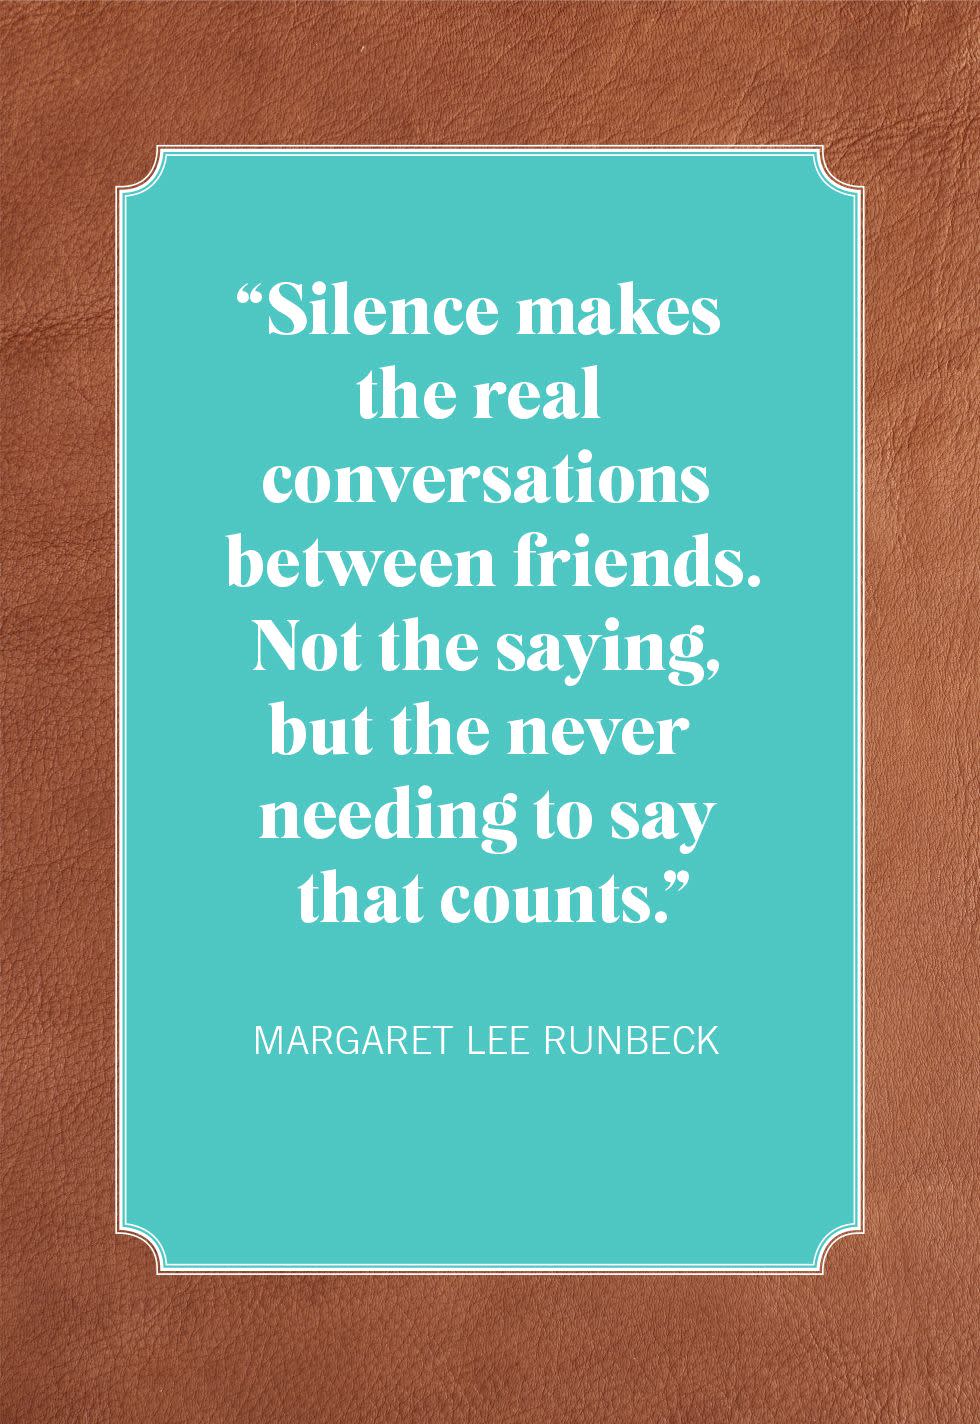 valentines day quotes for friends margaret lee runbeck